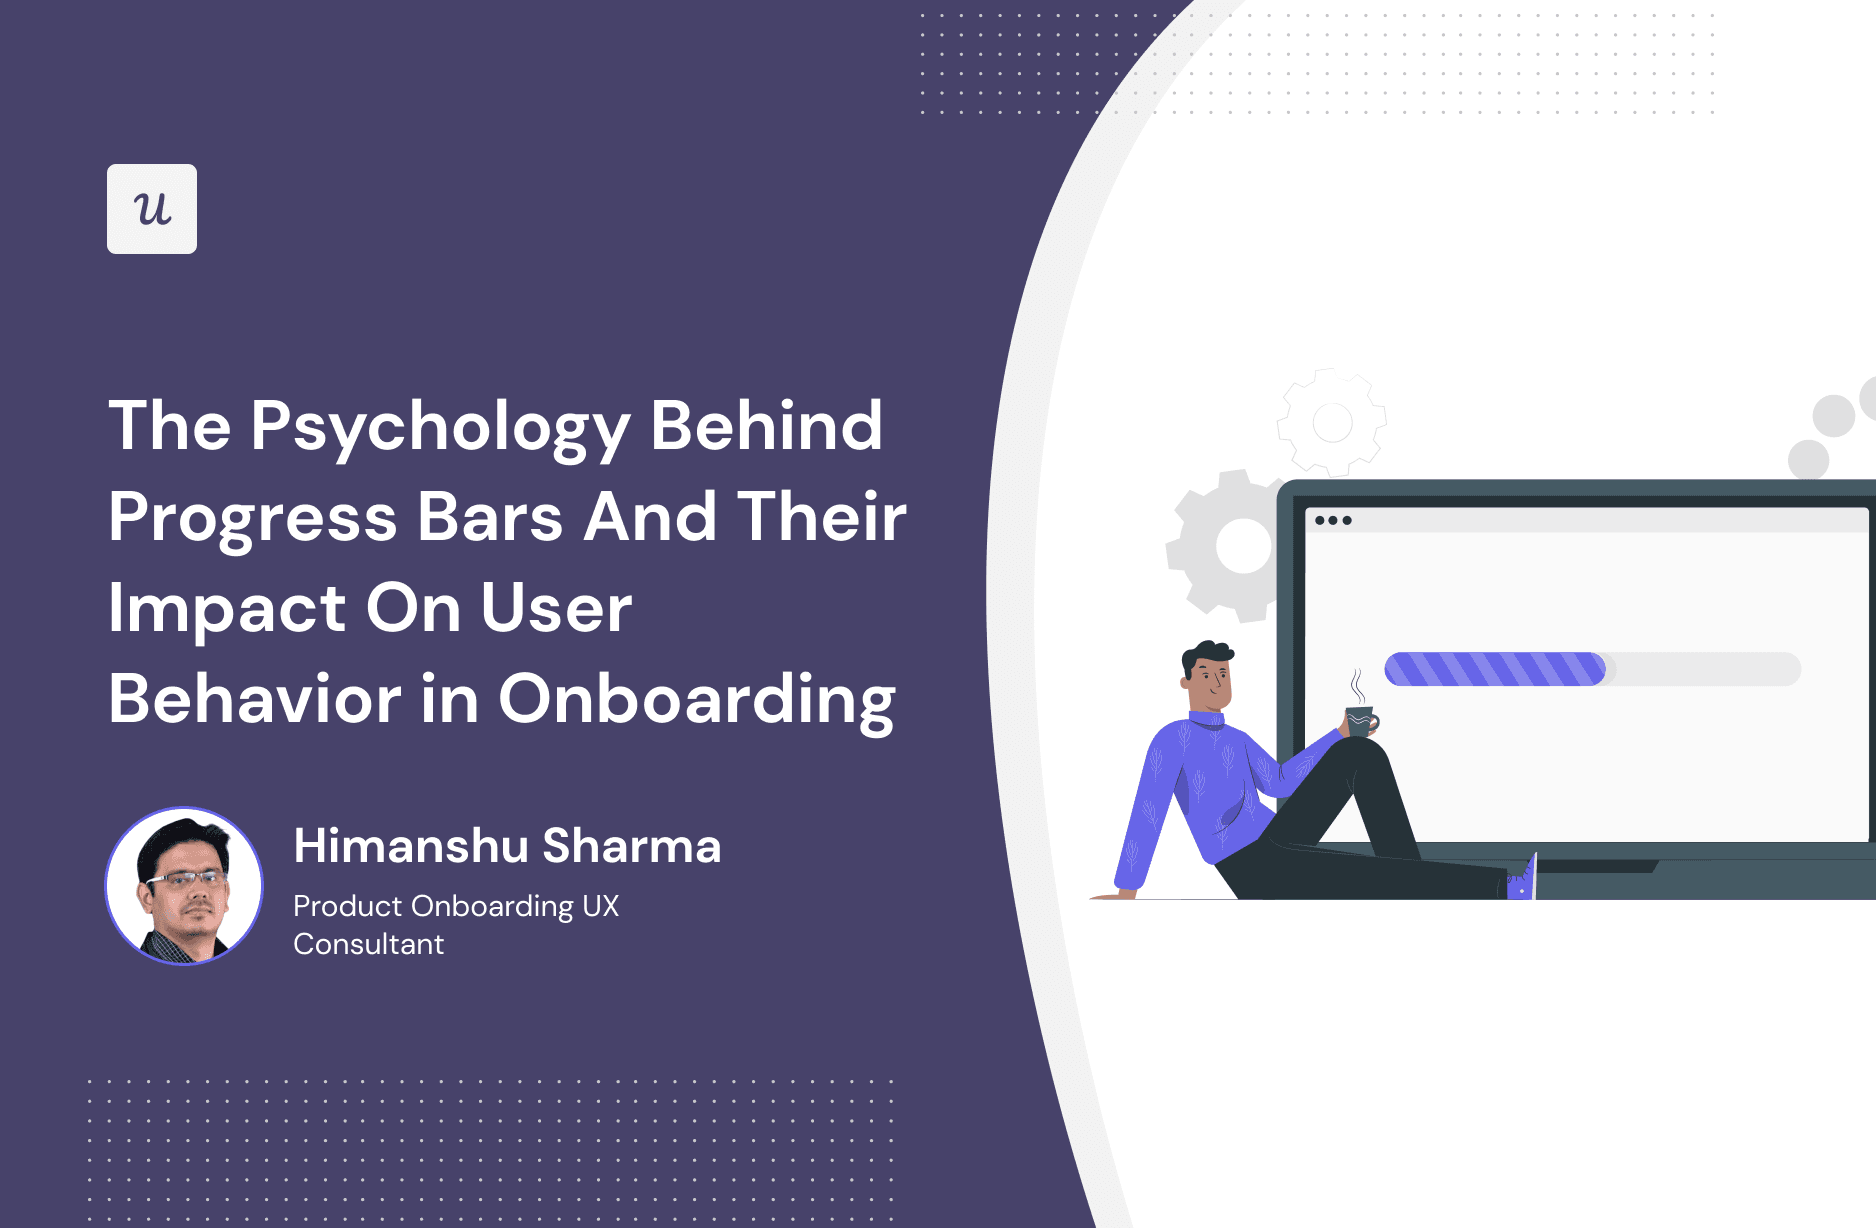 The Psychology Behind Progress Bars and Their Impact on User Behavior in Onboarding cover